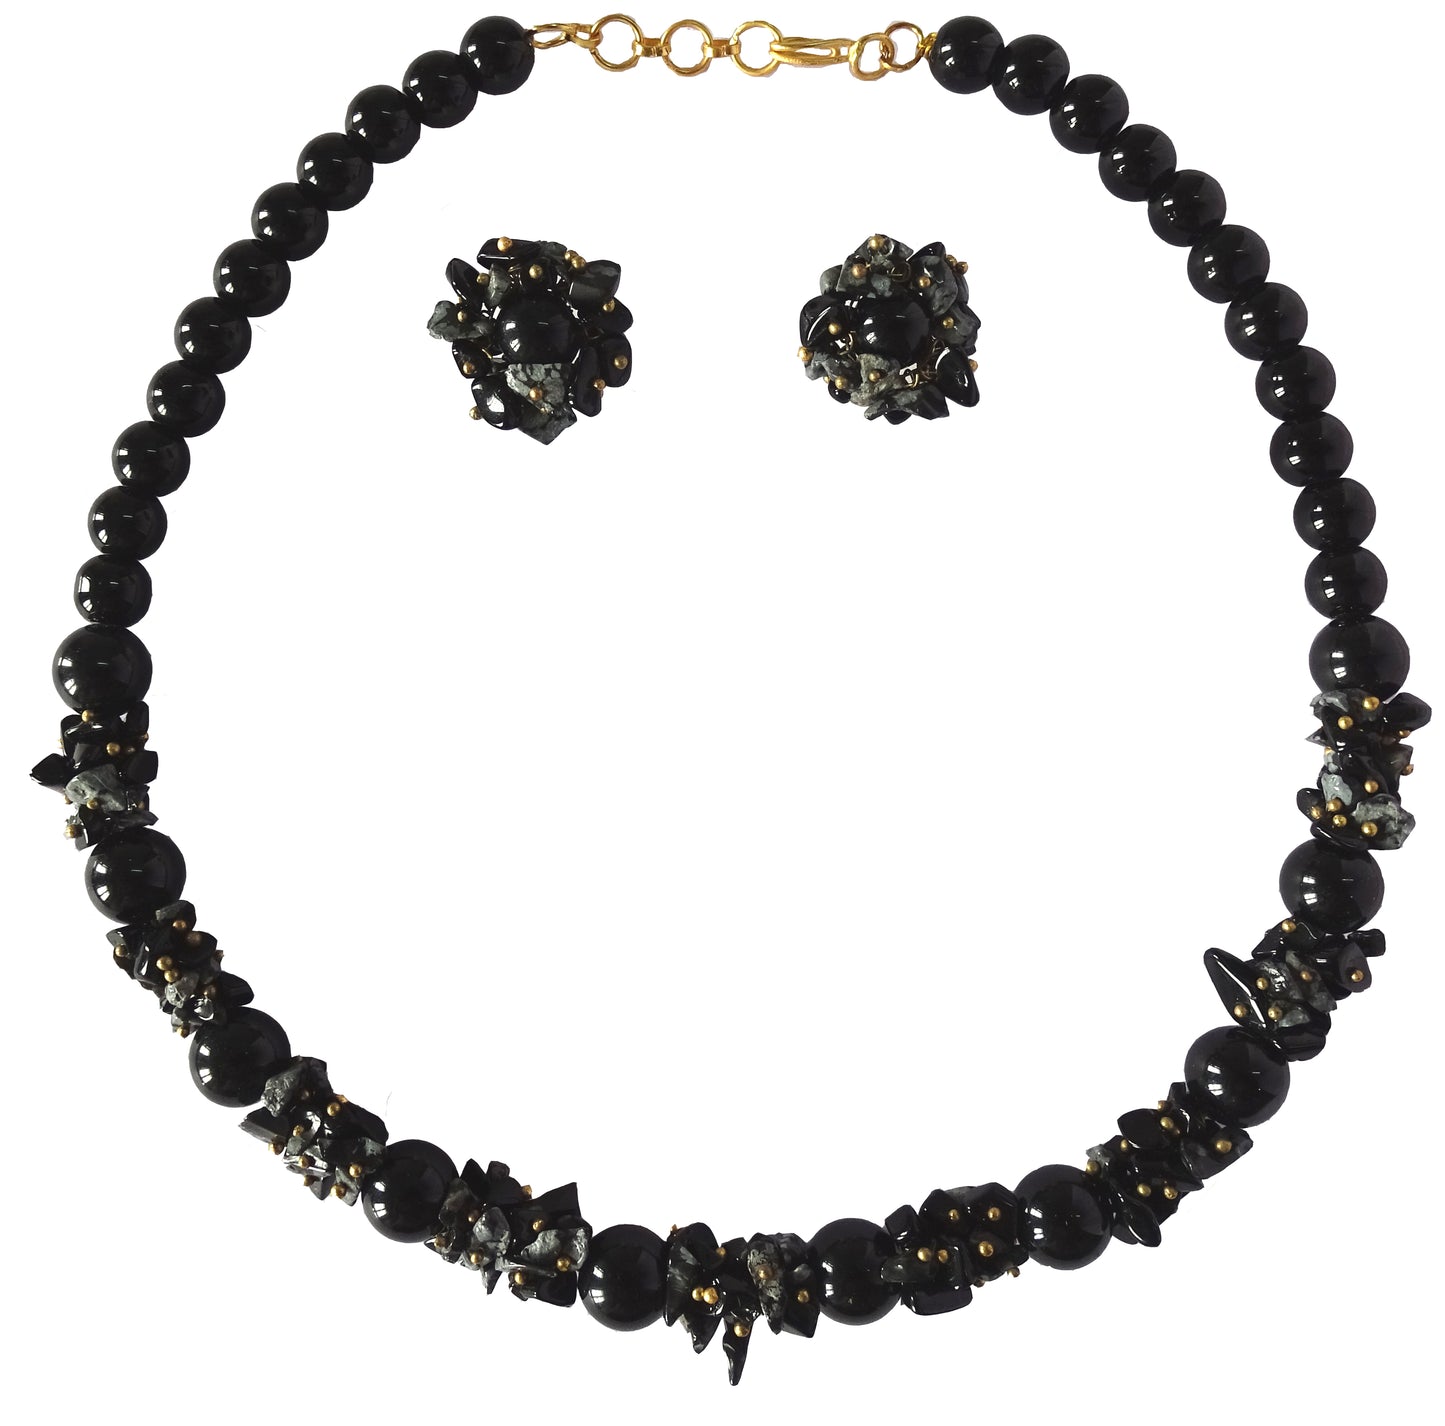 Centorganic - Semi Precious Gemstone Crystal Beads Necklace with Earring, Black Obsidian Stone chip and round bead of 10mm and 8mm 16" Mala for Girl and Women Fashion Jewellery, with beautiful jewellery box for gifting.